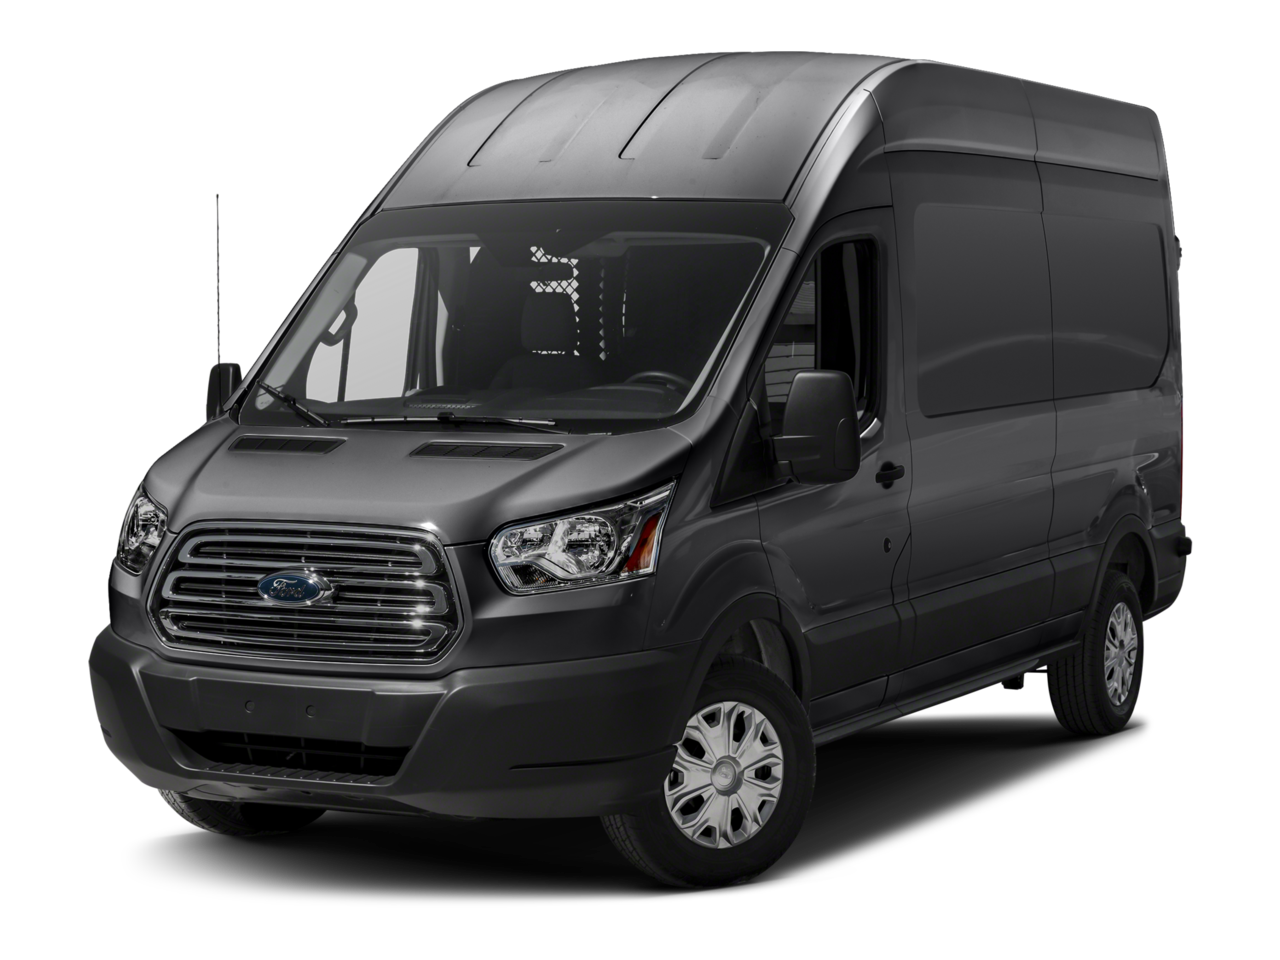 2017 Ford Transit-250 Repair: Service and Maintenance Cost